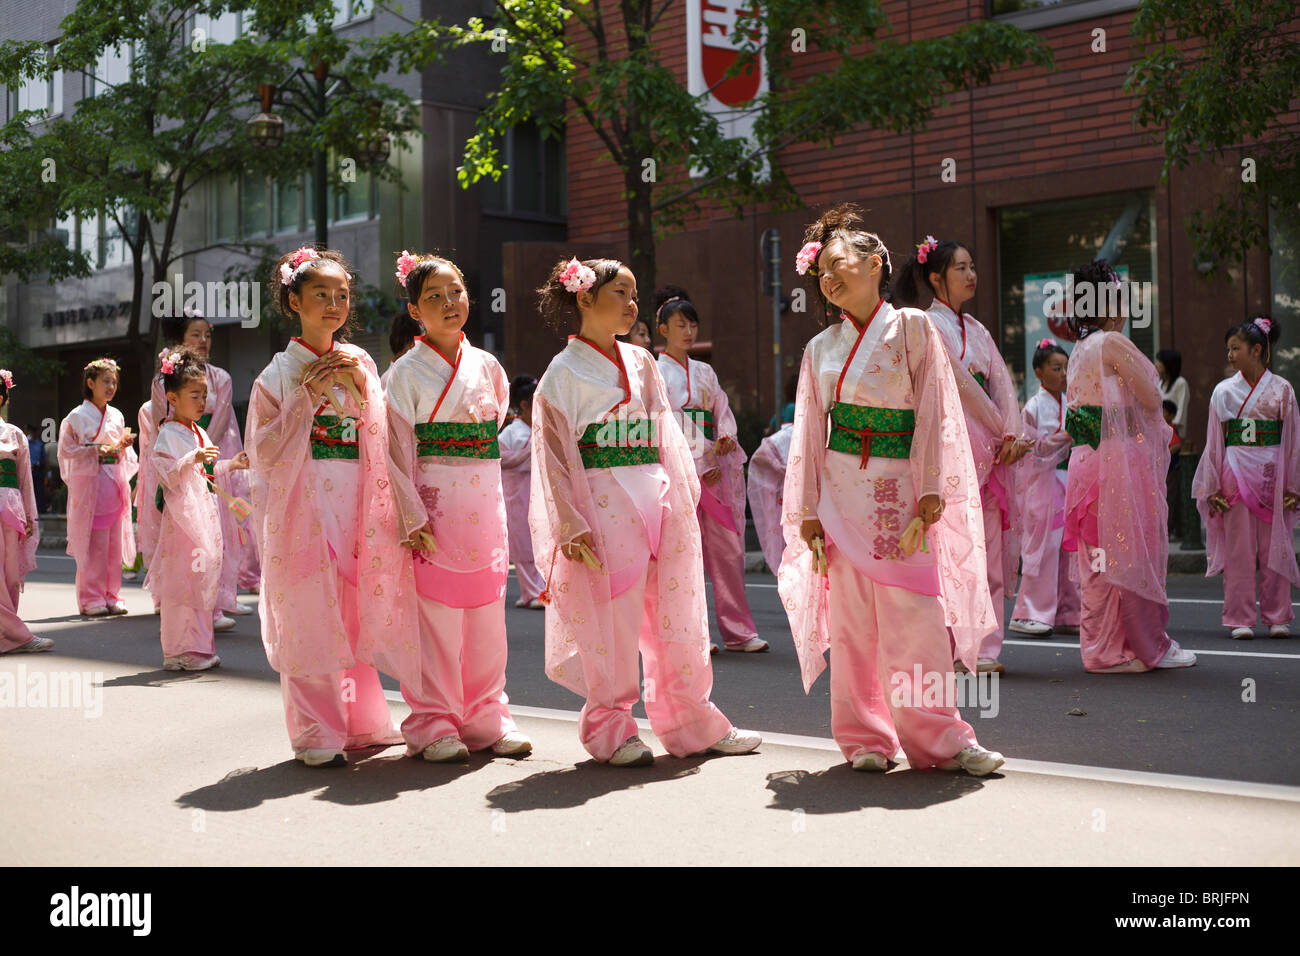 Four young girls dressed in soft pink Japanese outfits for Yosakoi street dance festival. Stock Photo